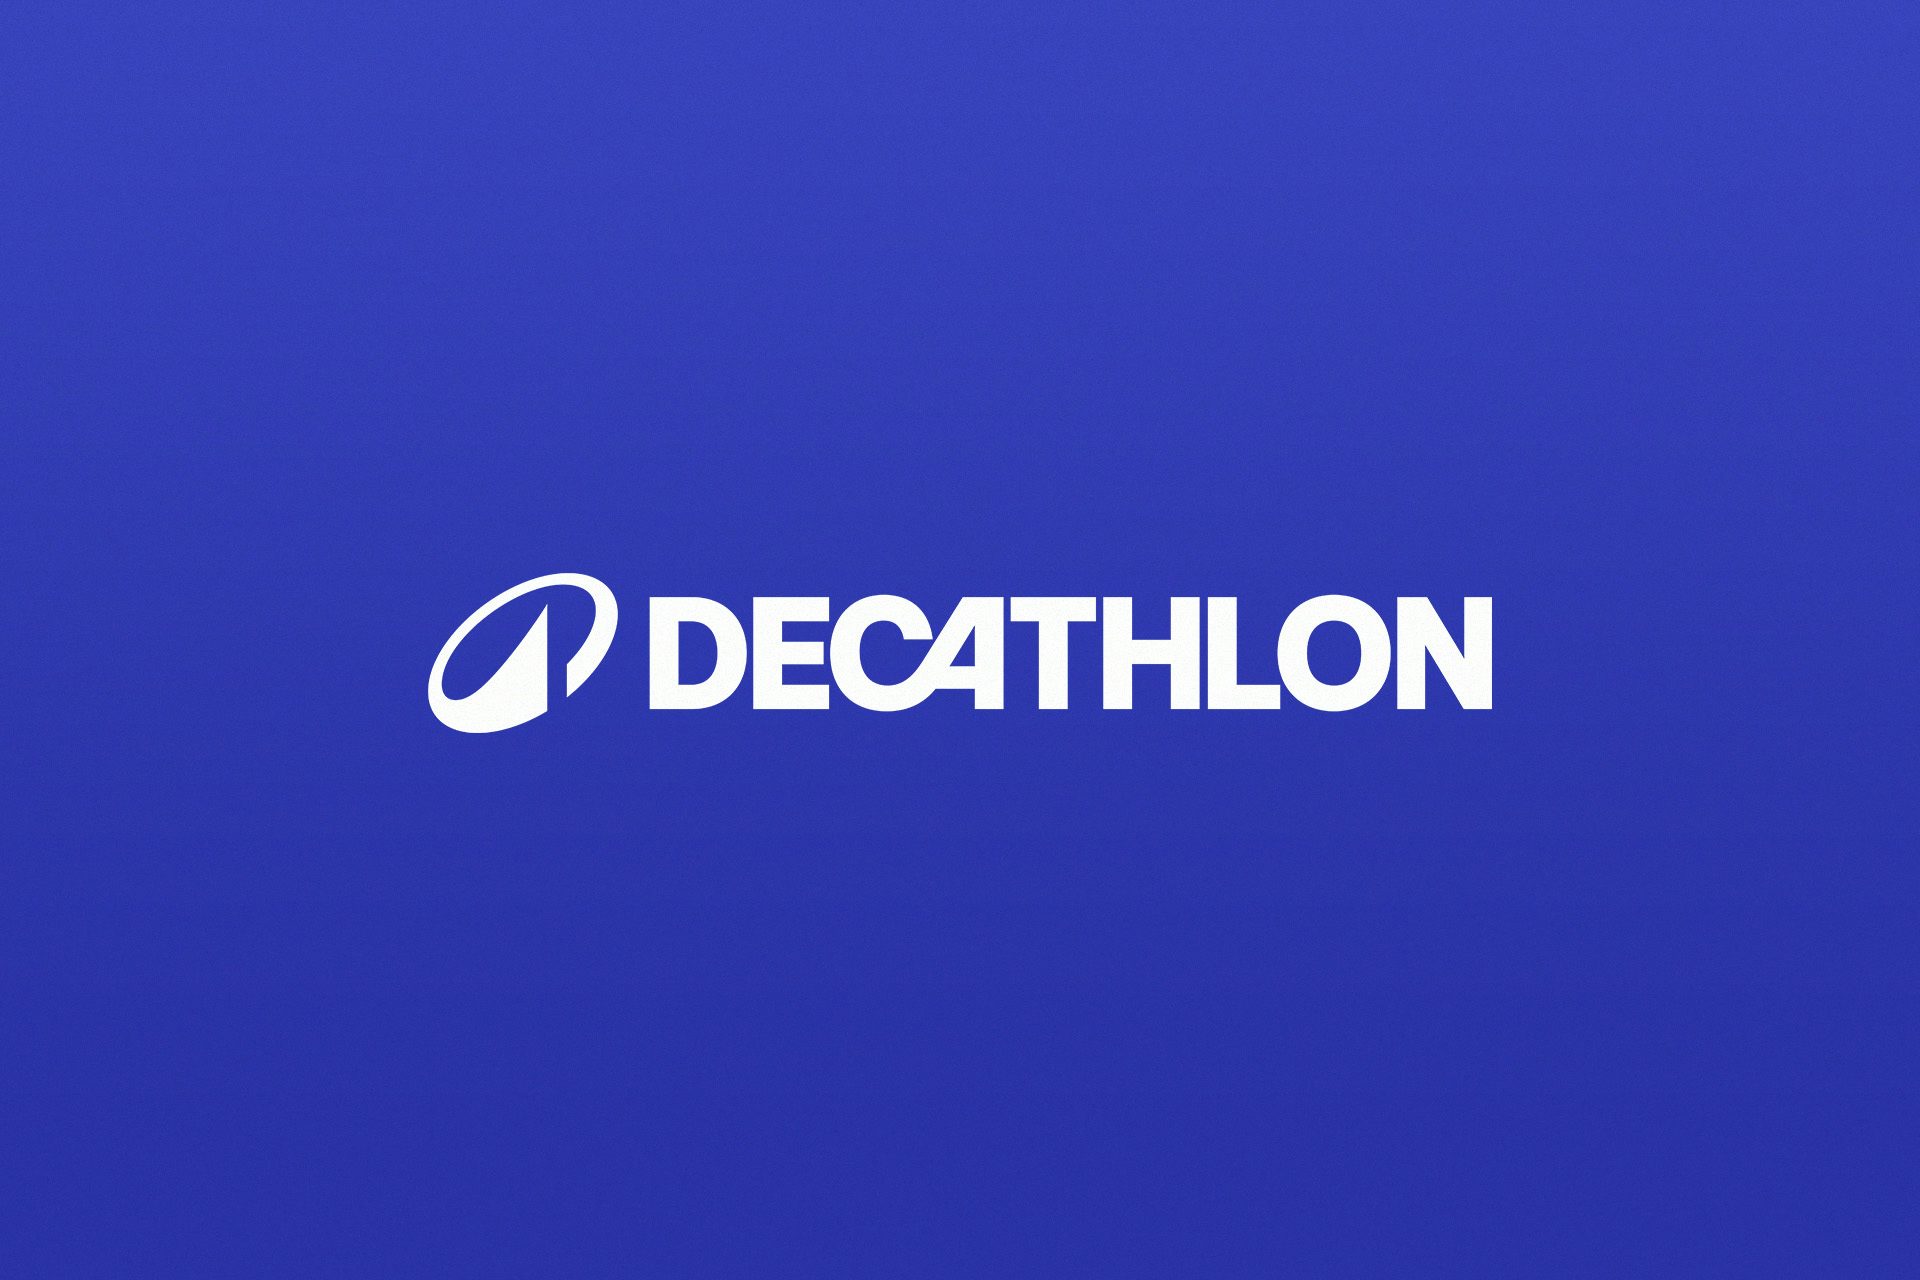 Image shows Decathlon's new wordmark and circular logo, created as part of its new branding